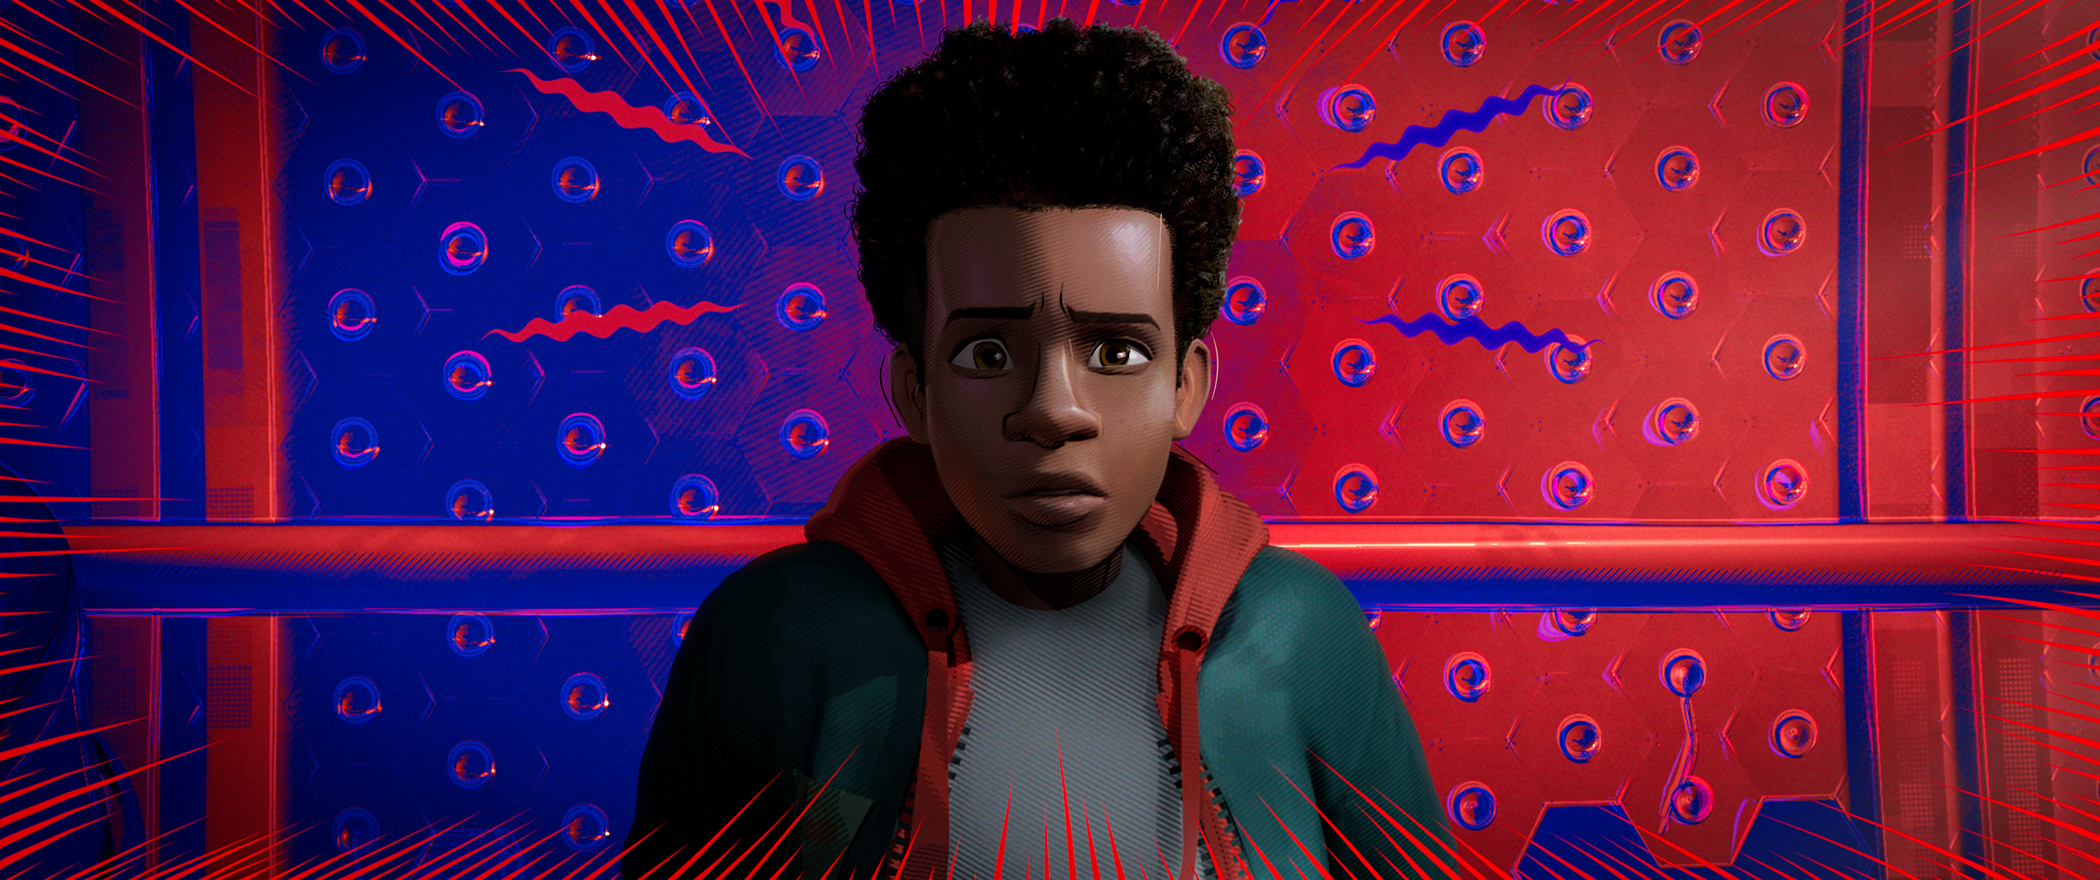 Miles Morales in Sony Pictures Animation's SPIDER-MAN: INTO THE SPIDER-VERSE.